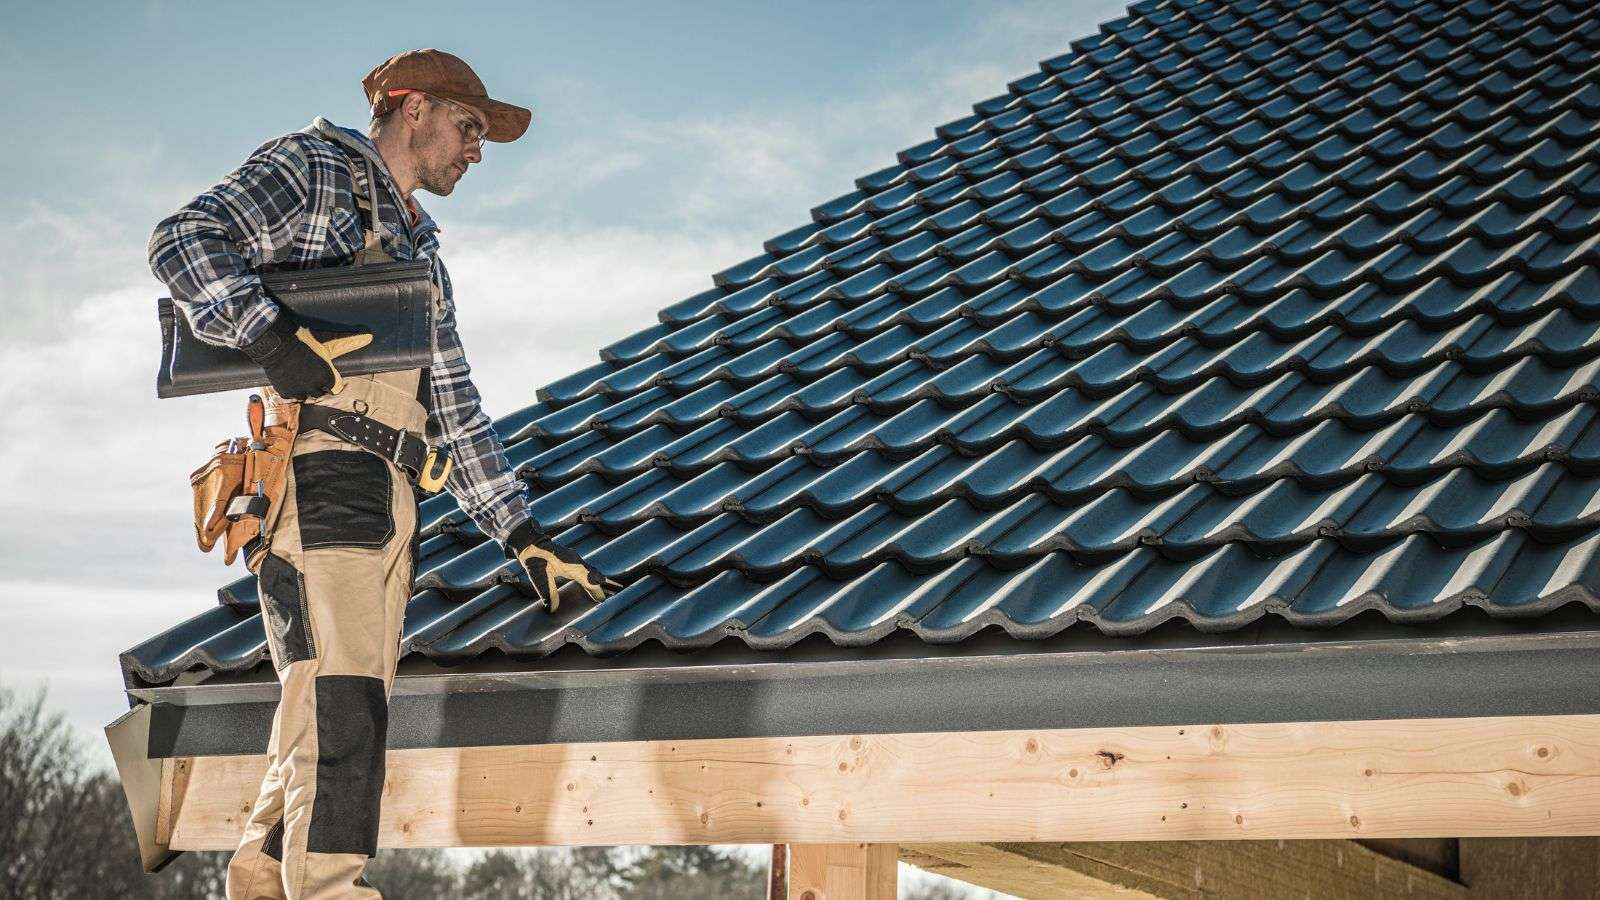 Ways How Technological Advancements Transformed Roofing Shingles - bighomeprojects.com